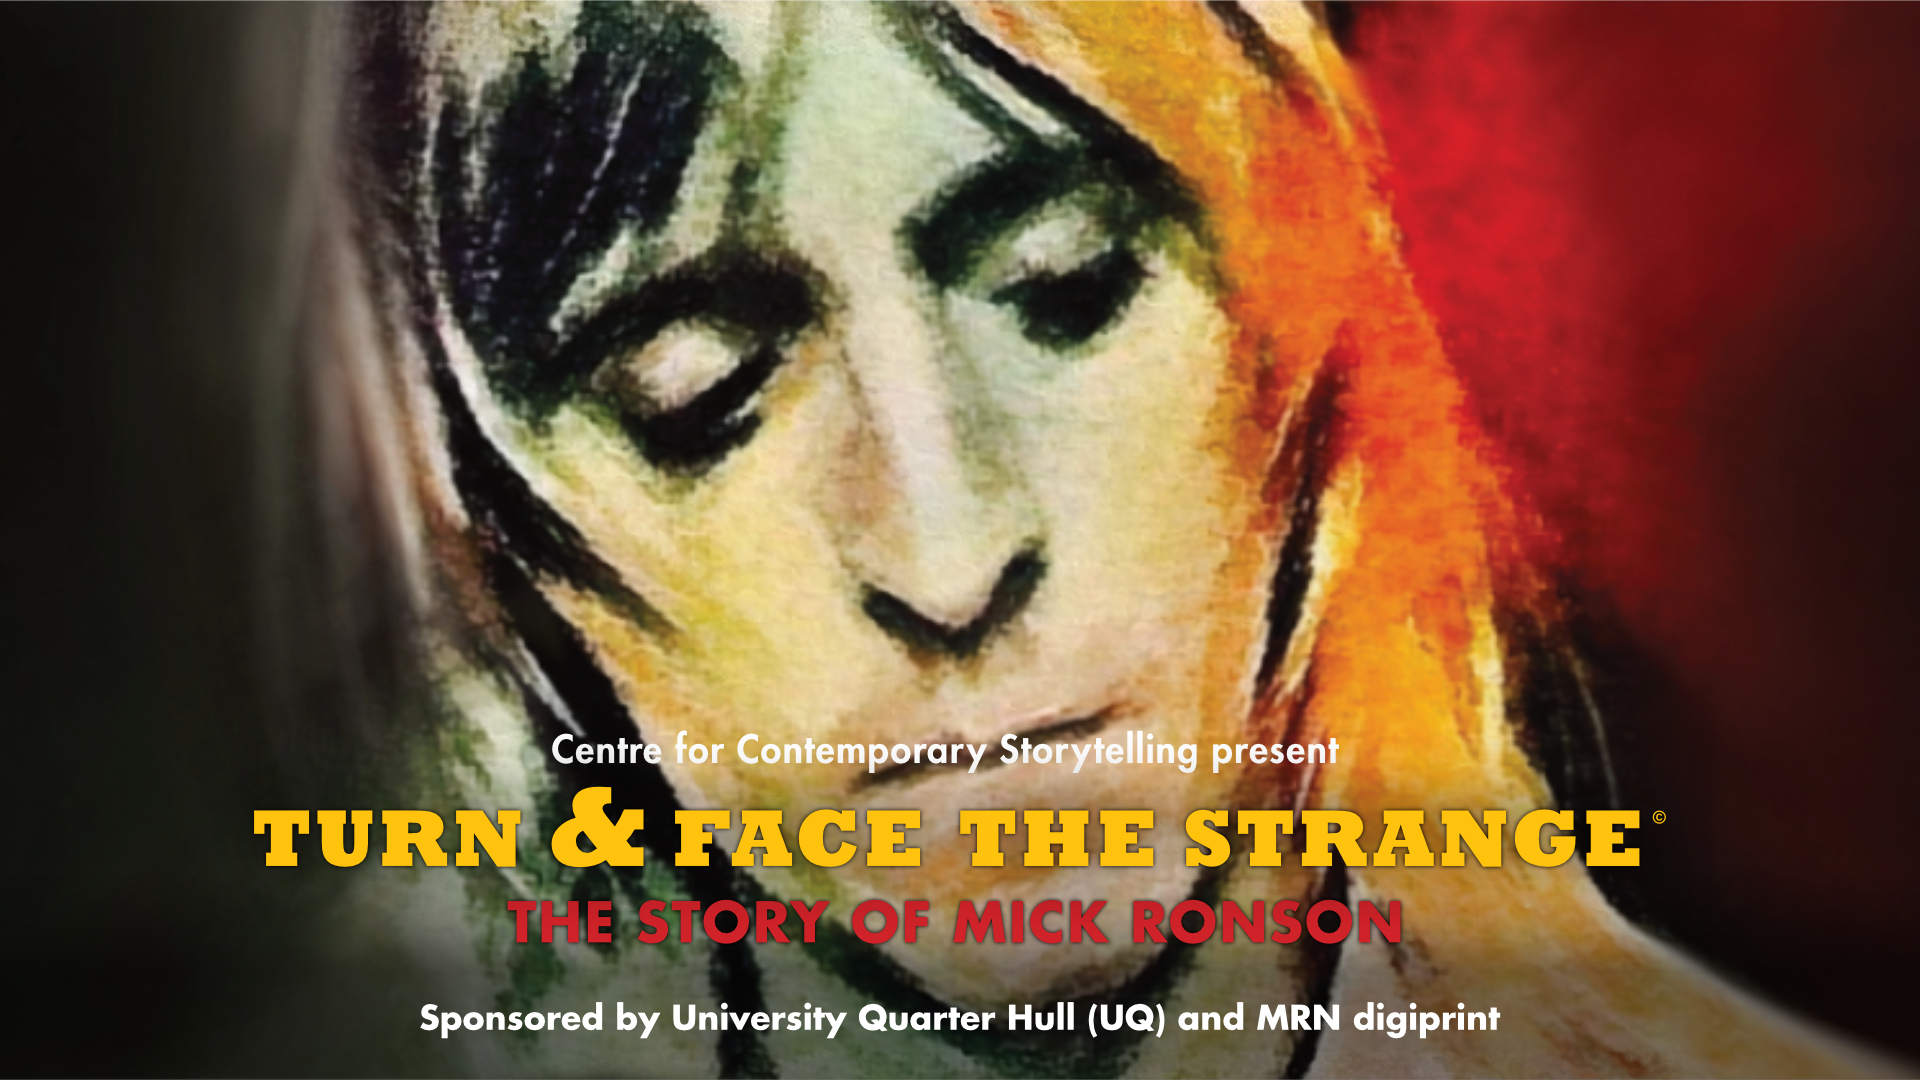 Mick Ronson depicted in a pastel-style drawing with Turn and Face the Strange across the image in yellow.